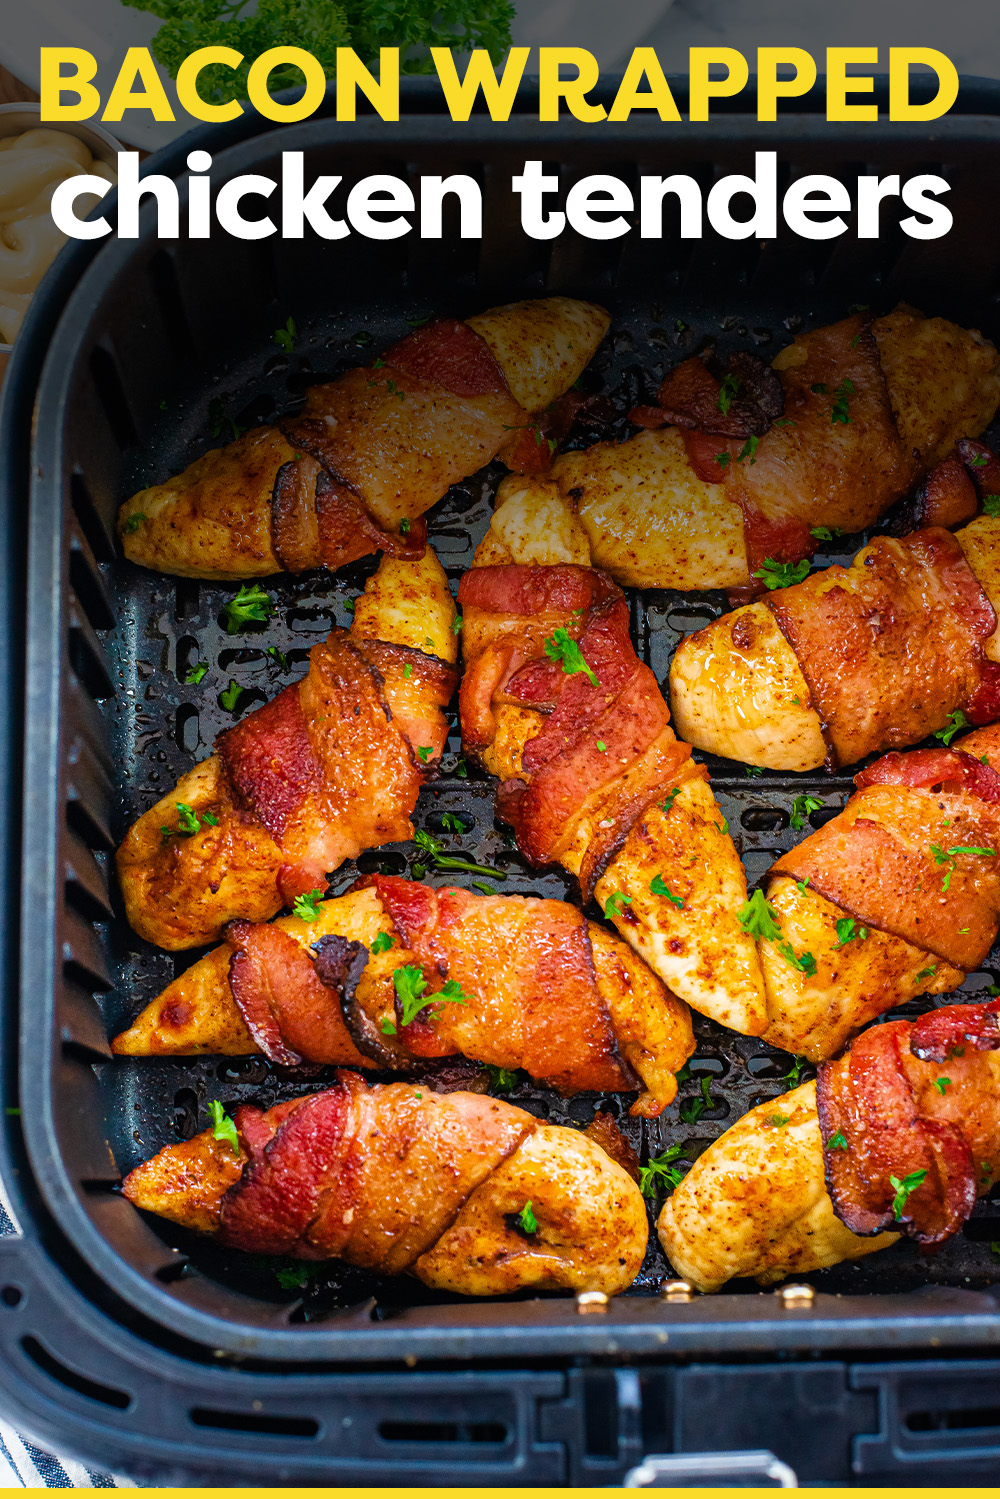 These chicken tenders are wrapped in bacon and then air fried!  The bacon comes out crisp and the tenders nice and moist!